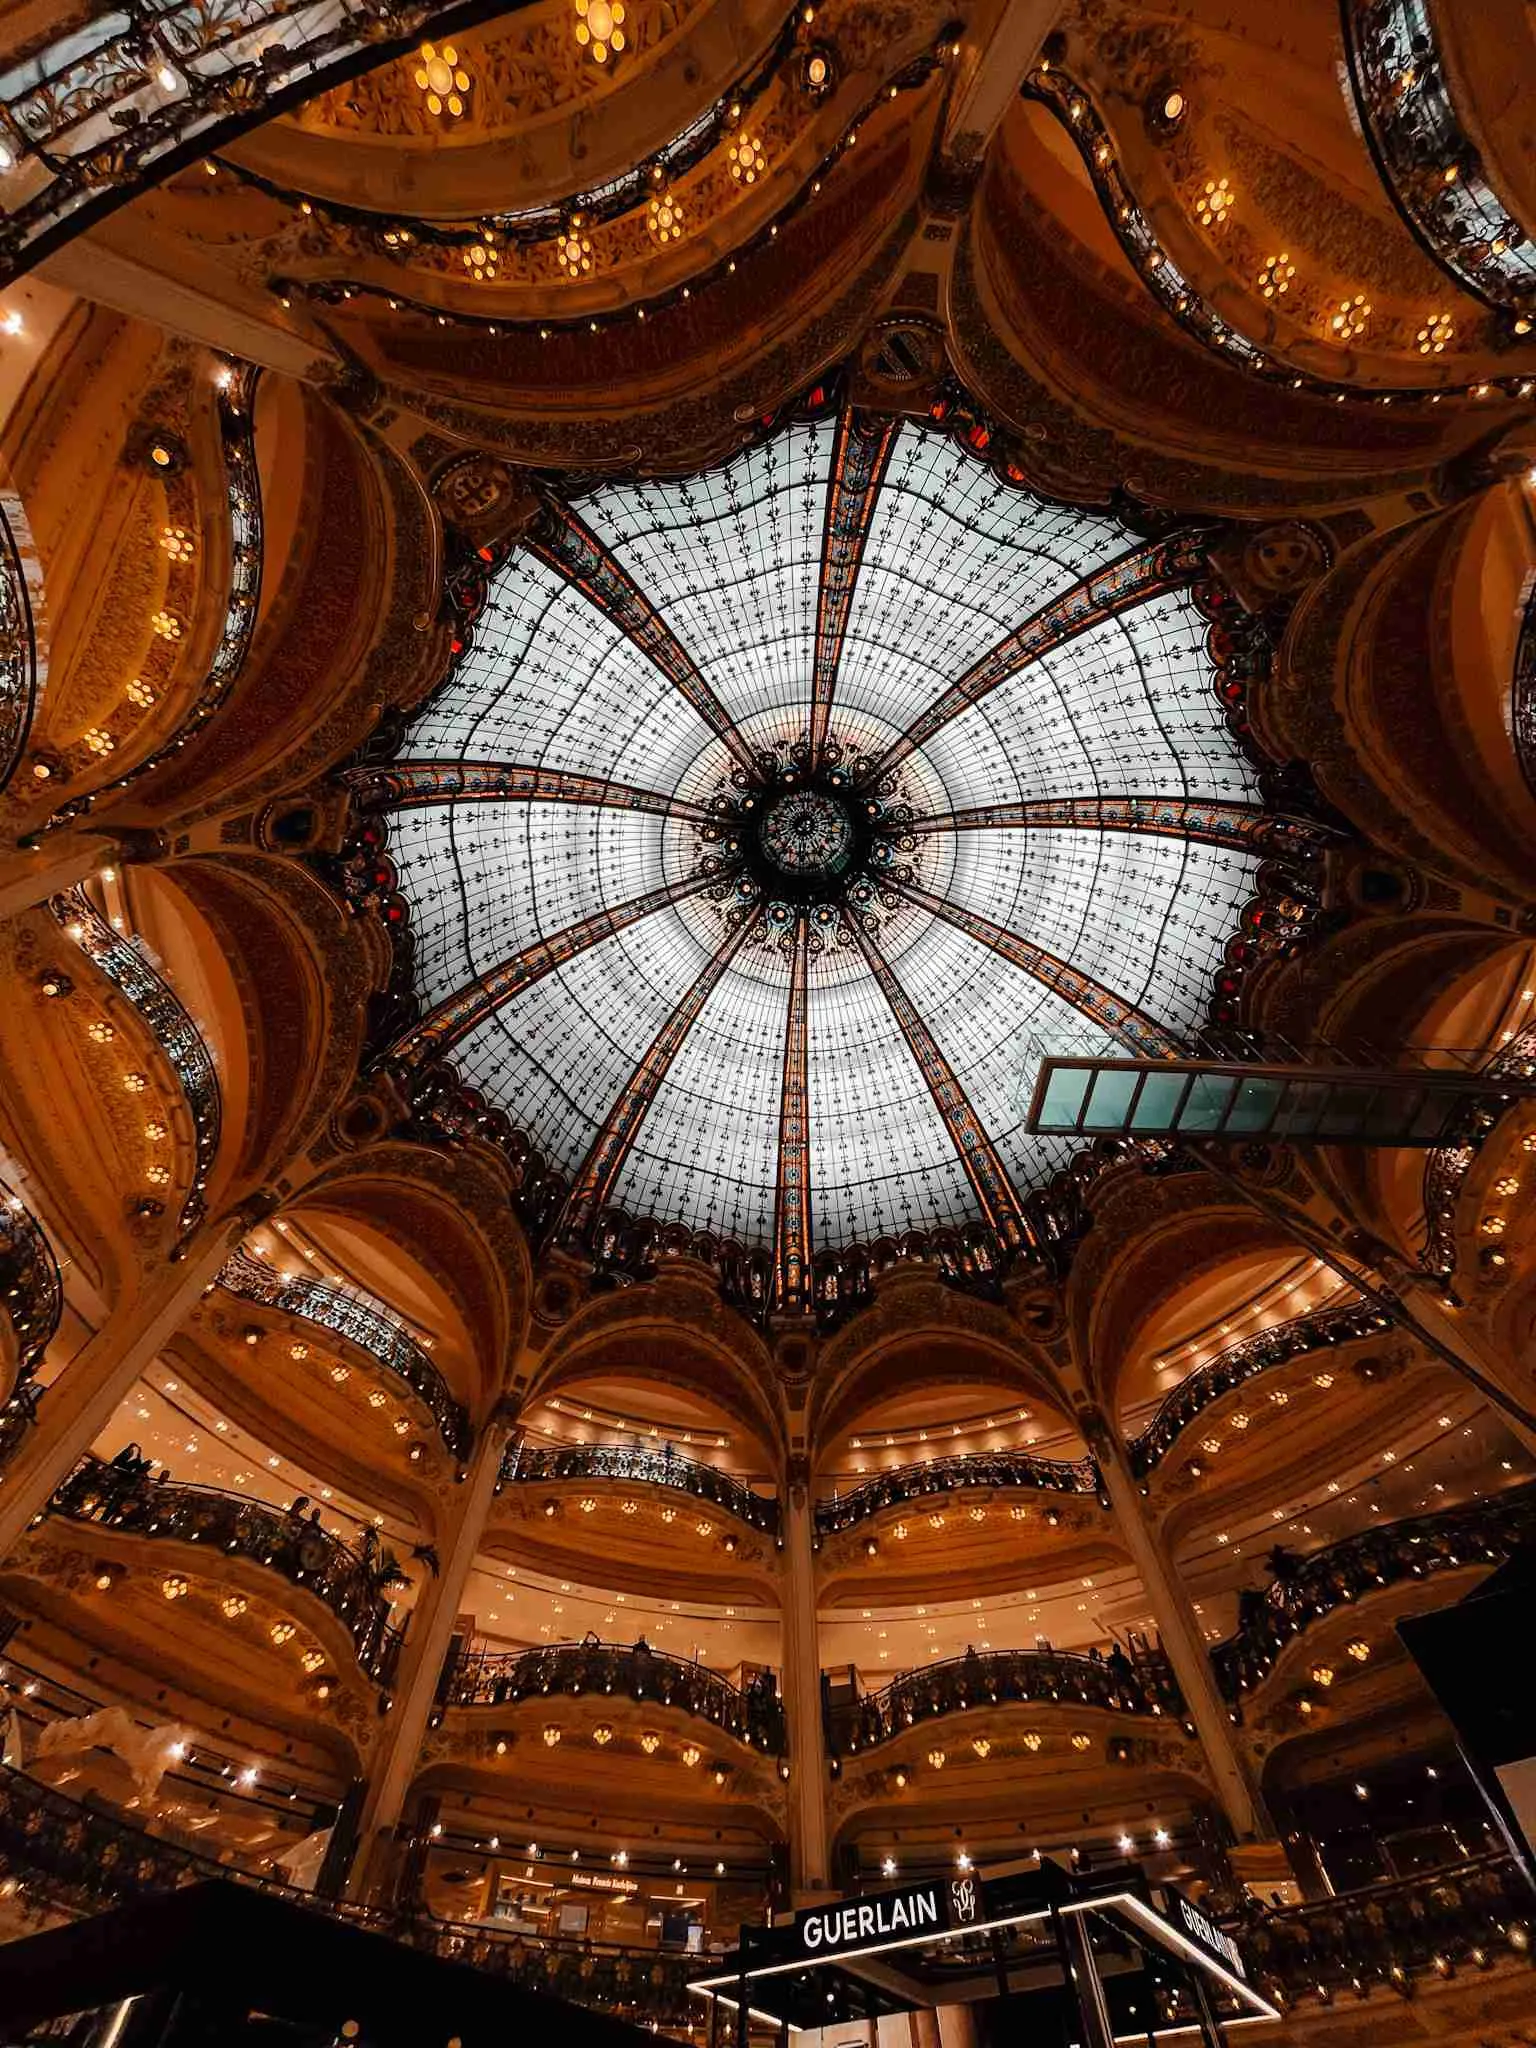 The magnificent glass dome inside the Galleries Lafayette